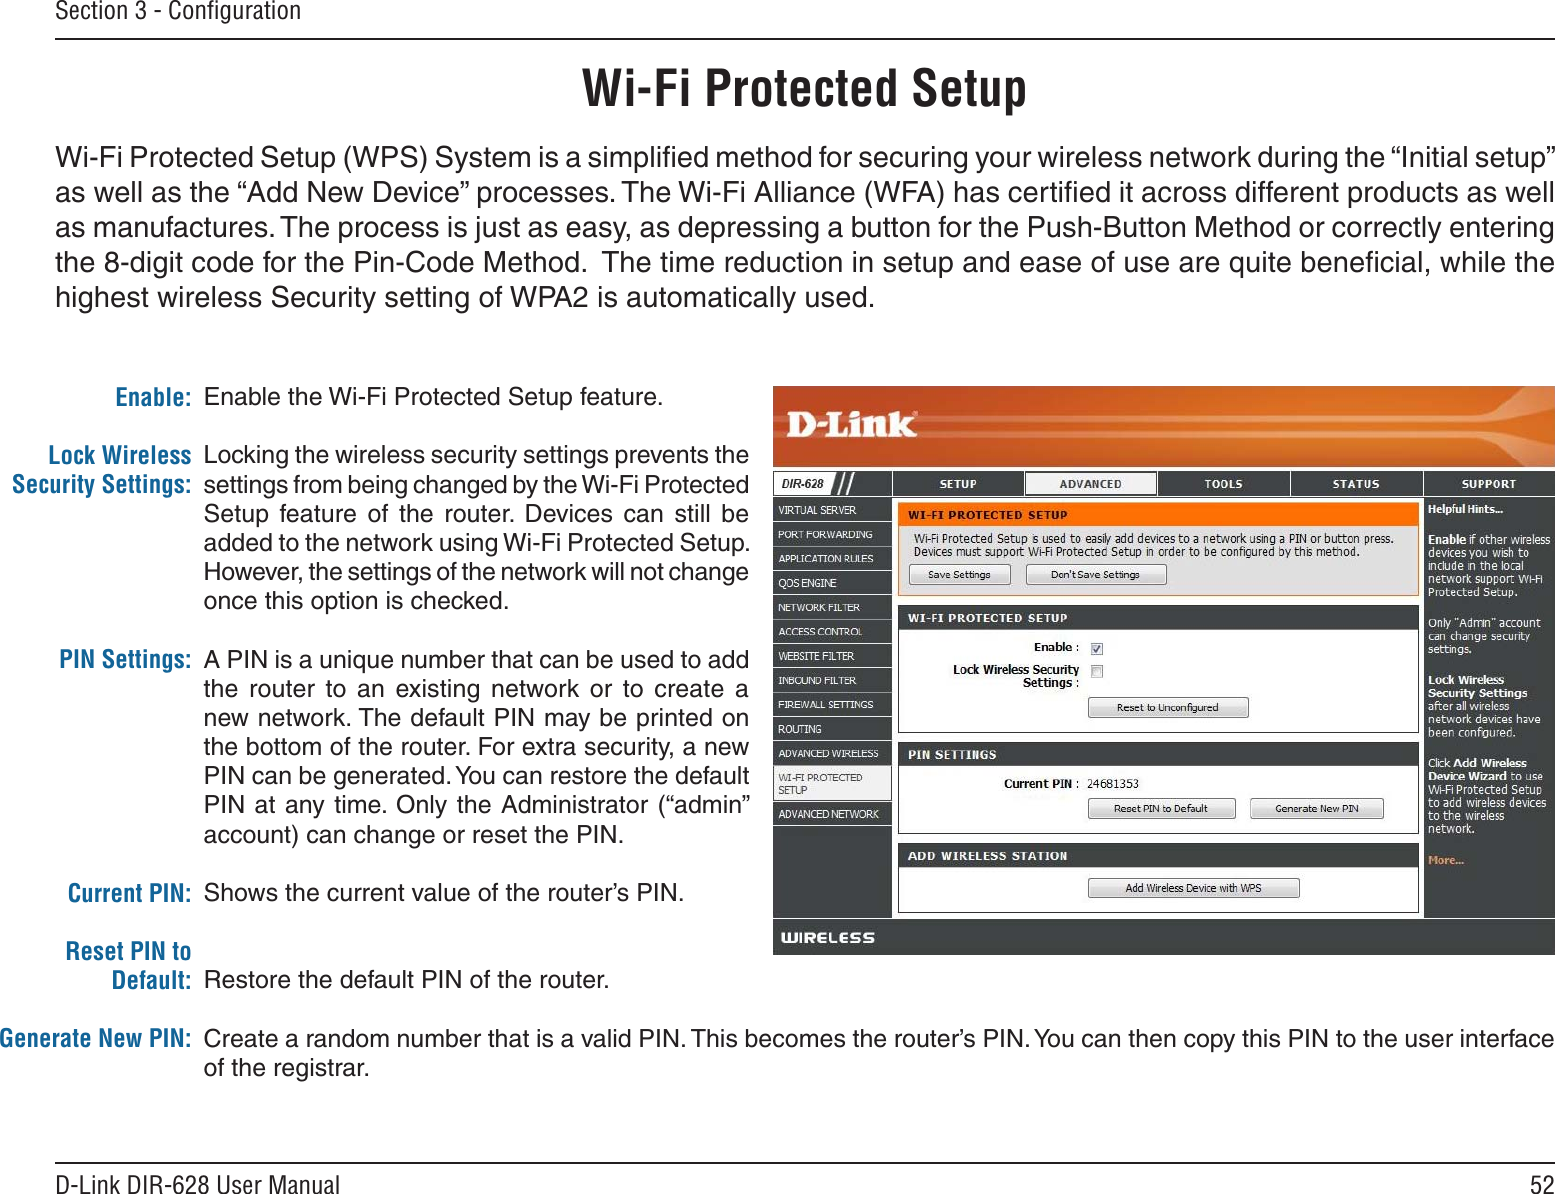 52D-Link DIR-628 User ManualSection 3 - ConﬁgurationEnable the Wi-Fi Protected Setup feature. Locking the wireless security settings prevents the settings from being changed by the Wi-Fi Protected Setup  feature  of  the  router.  Devices  can  still  be added to the network using Wi-Fi Protected Setup. However, the settings of the network will not change once this option is checked.A PIN is a unique number that can be used to add the  router  to  an  existing  network  or  to  create  a new network. The default PIN may be printed on the bottom of the router. For extra security, a new PIN can be generated. You can restore the default PIN at any time. Only the Administrator (“admin” account) can change or reset the PIN. Shows the current value of the router’s PIN. Restore the default PIN of the router. Create a random number that is a valid PIN. This becomes the router’s PIN. You can then copy this PIN to the user interface of the registrar.Enable:Lock Wireless Security Settings:PIN Settings:Current PIN:Reset PIN to Default:Generate New PIN:Wi-Fi Protected SetupWi-Fi Protected Setup (WPS) System is a simpliﬁed method for securing your wireless network during the “Initial setup” as well as the “Add New Device” processes. The Wi-Fi Alliance (WFA) has certiﬁed it across different products as well as manufactures. The process is just as easy, as depressing a button for the Push-Button Method or correctly entering the 8-digit code for the Pin-Code Method.  The time reduction in setup and ease of use are quite beneﬁcial, while the highest wireless Security setting of WPA2 is automatically used.